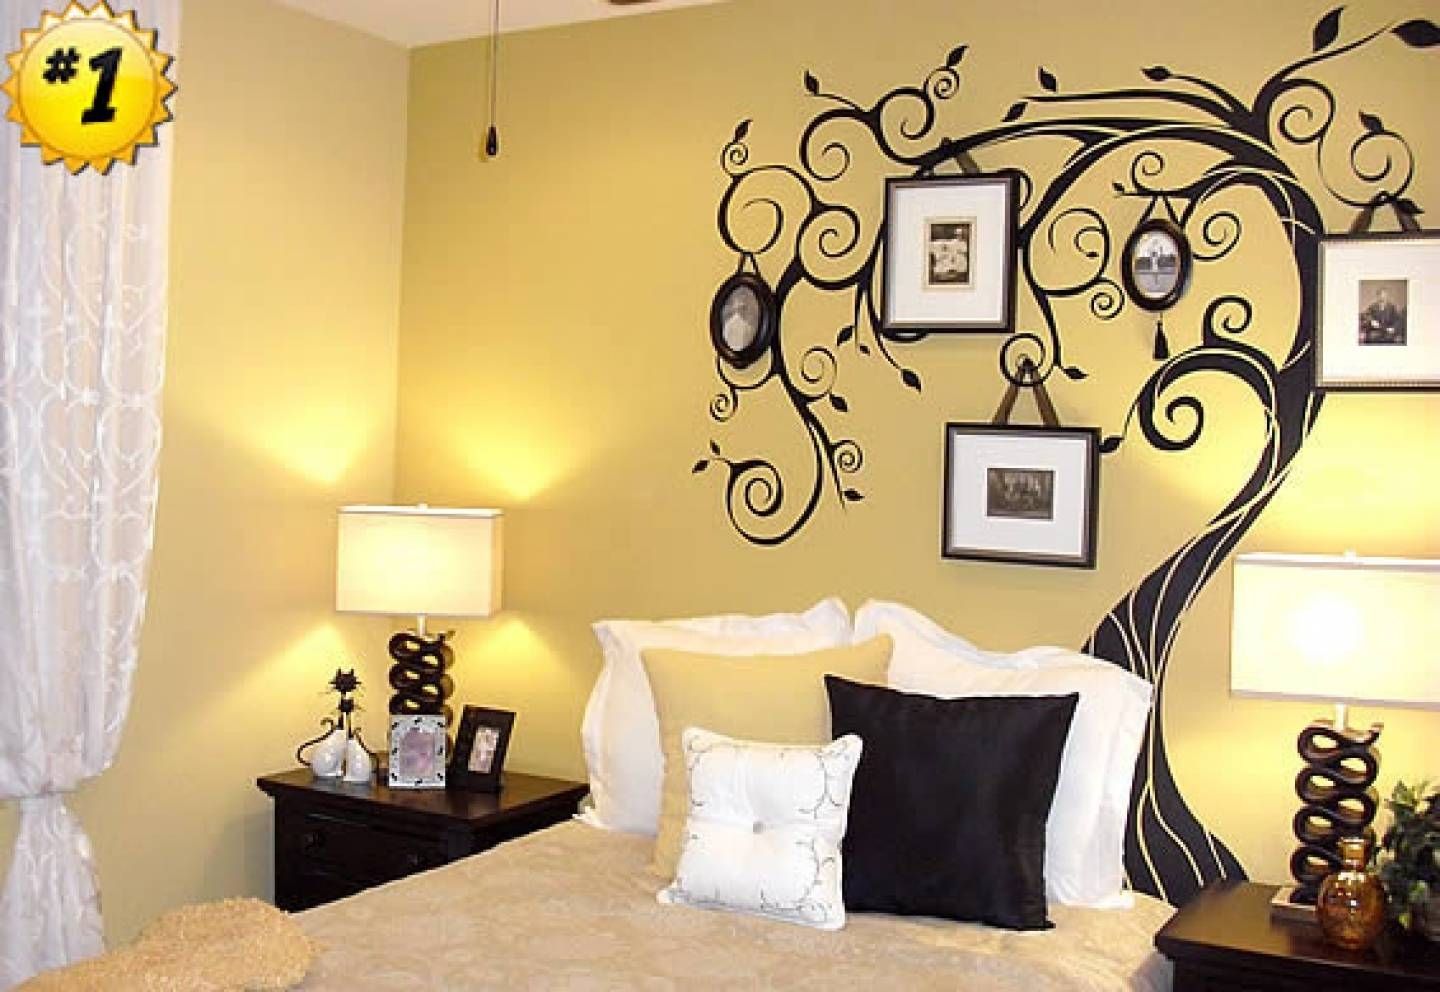 Wall Stickers Designs With Others 37176 Bedroom Wall Art Decor Regarding Latest Wall Art Deco Decals (Gallery 19 of 20)